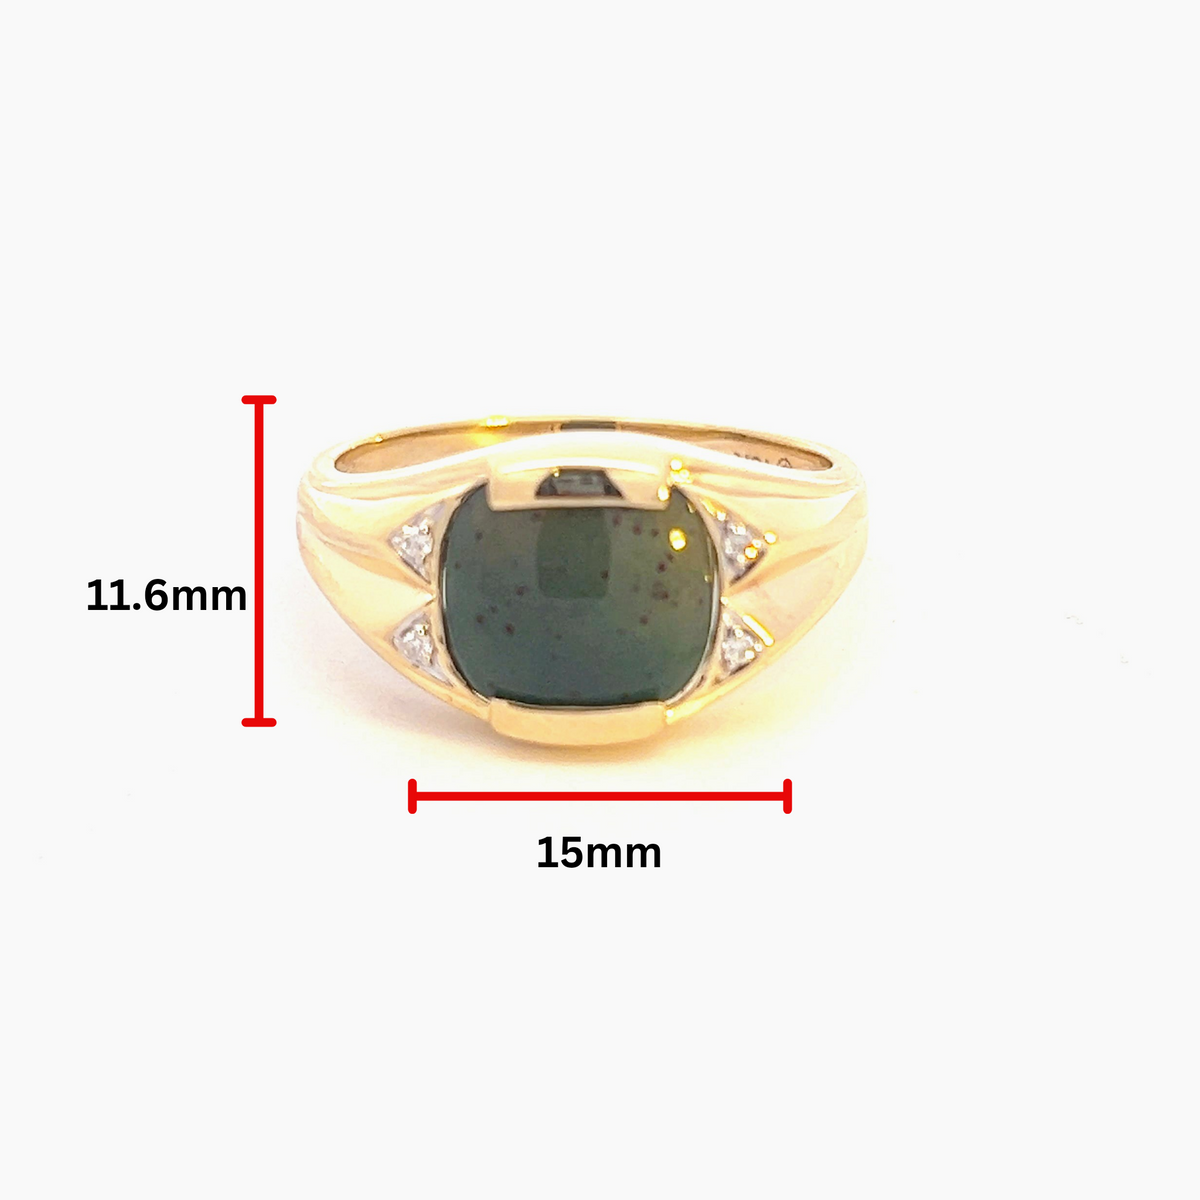 10K Yellow Gold 0.02cttw Diamond and Bloodstone Gents Ring, size 10